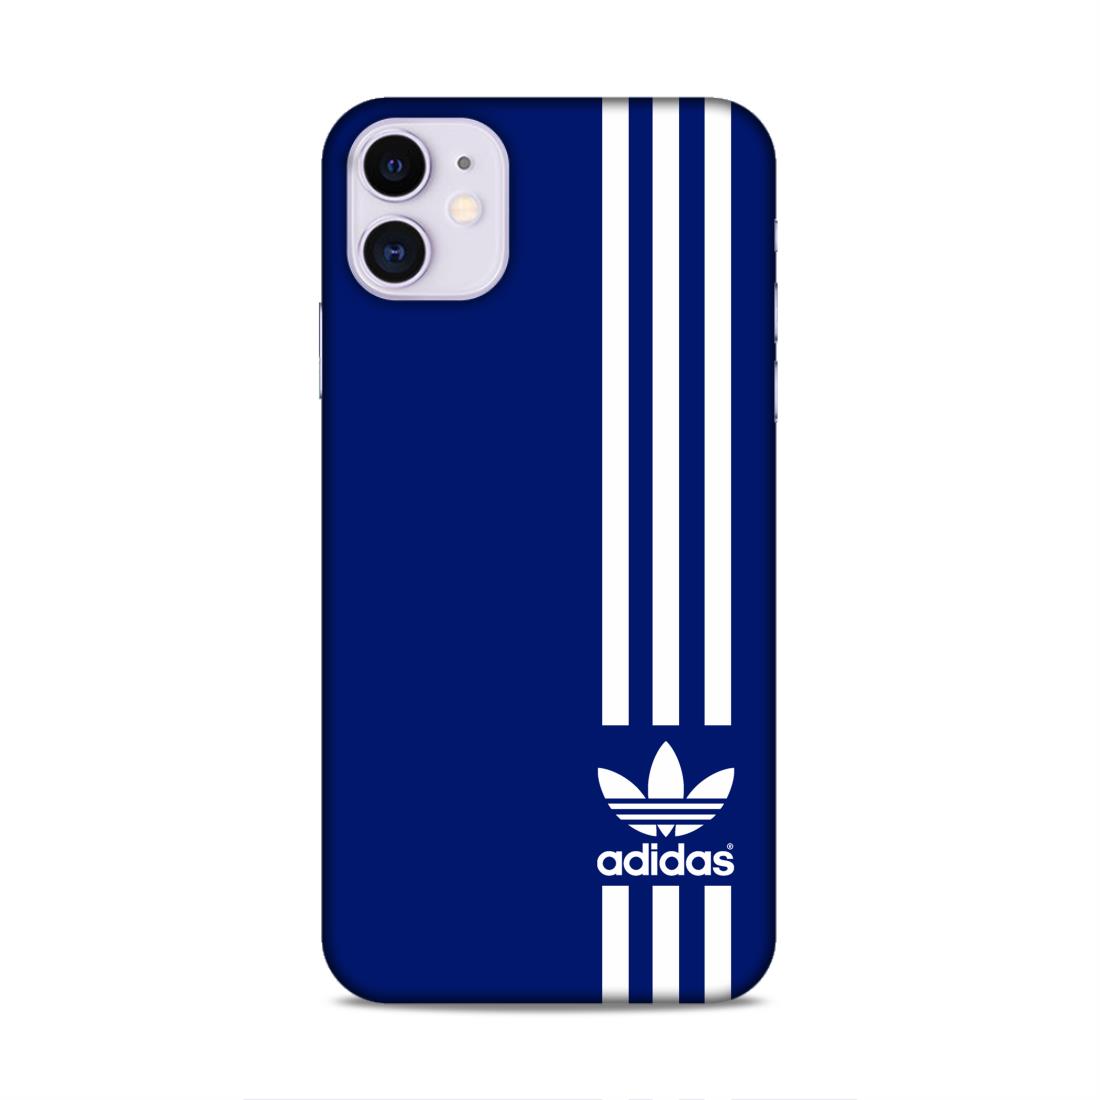 Adidas in Blue Hard Back Case For Apple iPhone 11